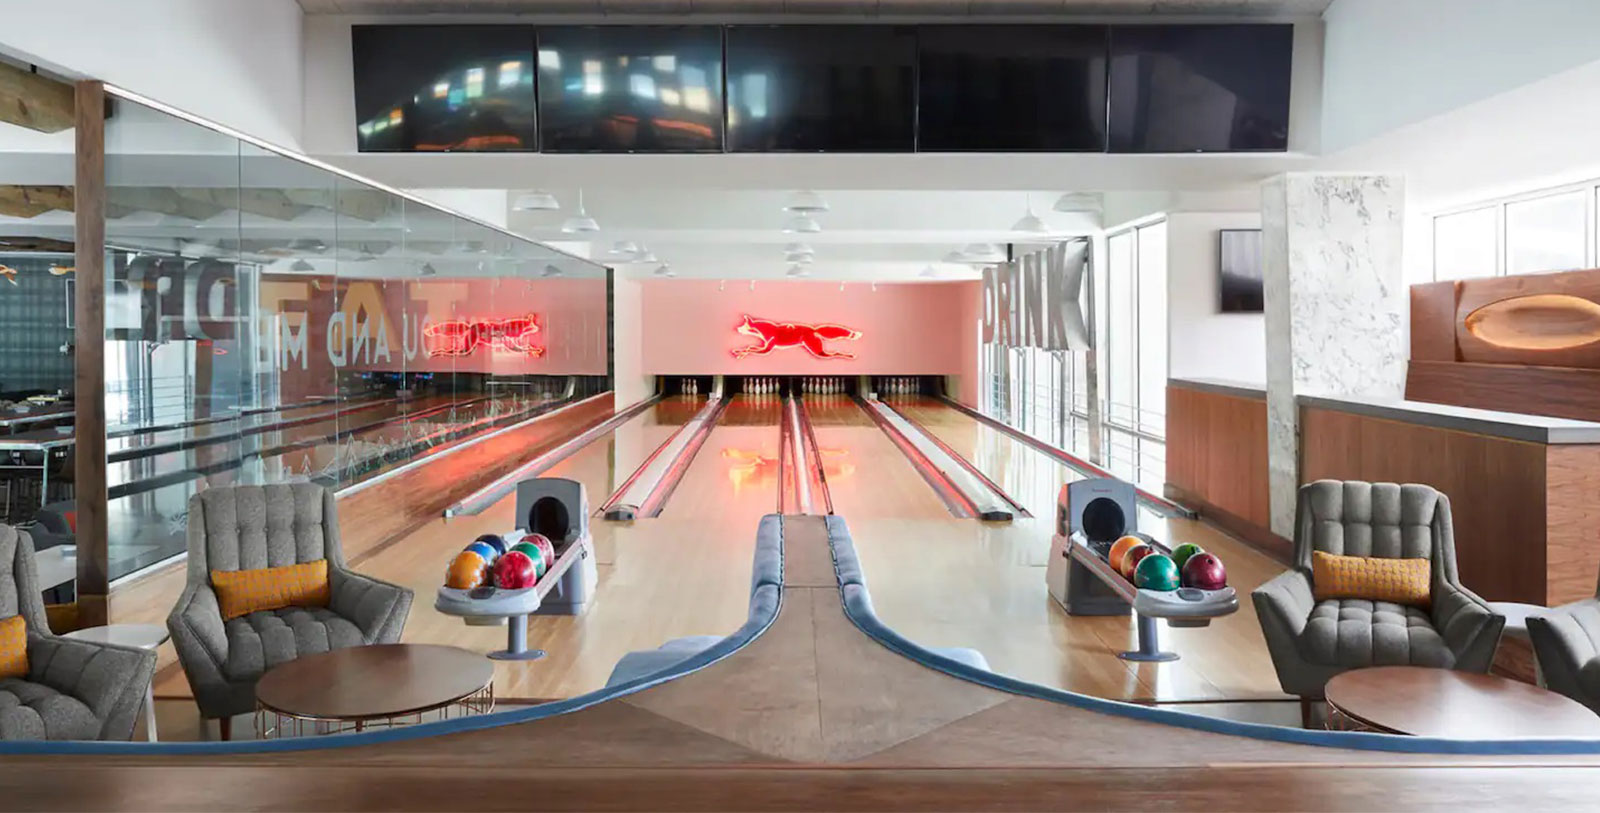 Experience The Statlers’ 4,000 square foot gaming hall and challenge friends to a round of bowling.